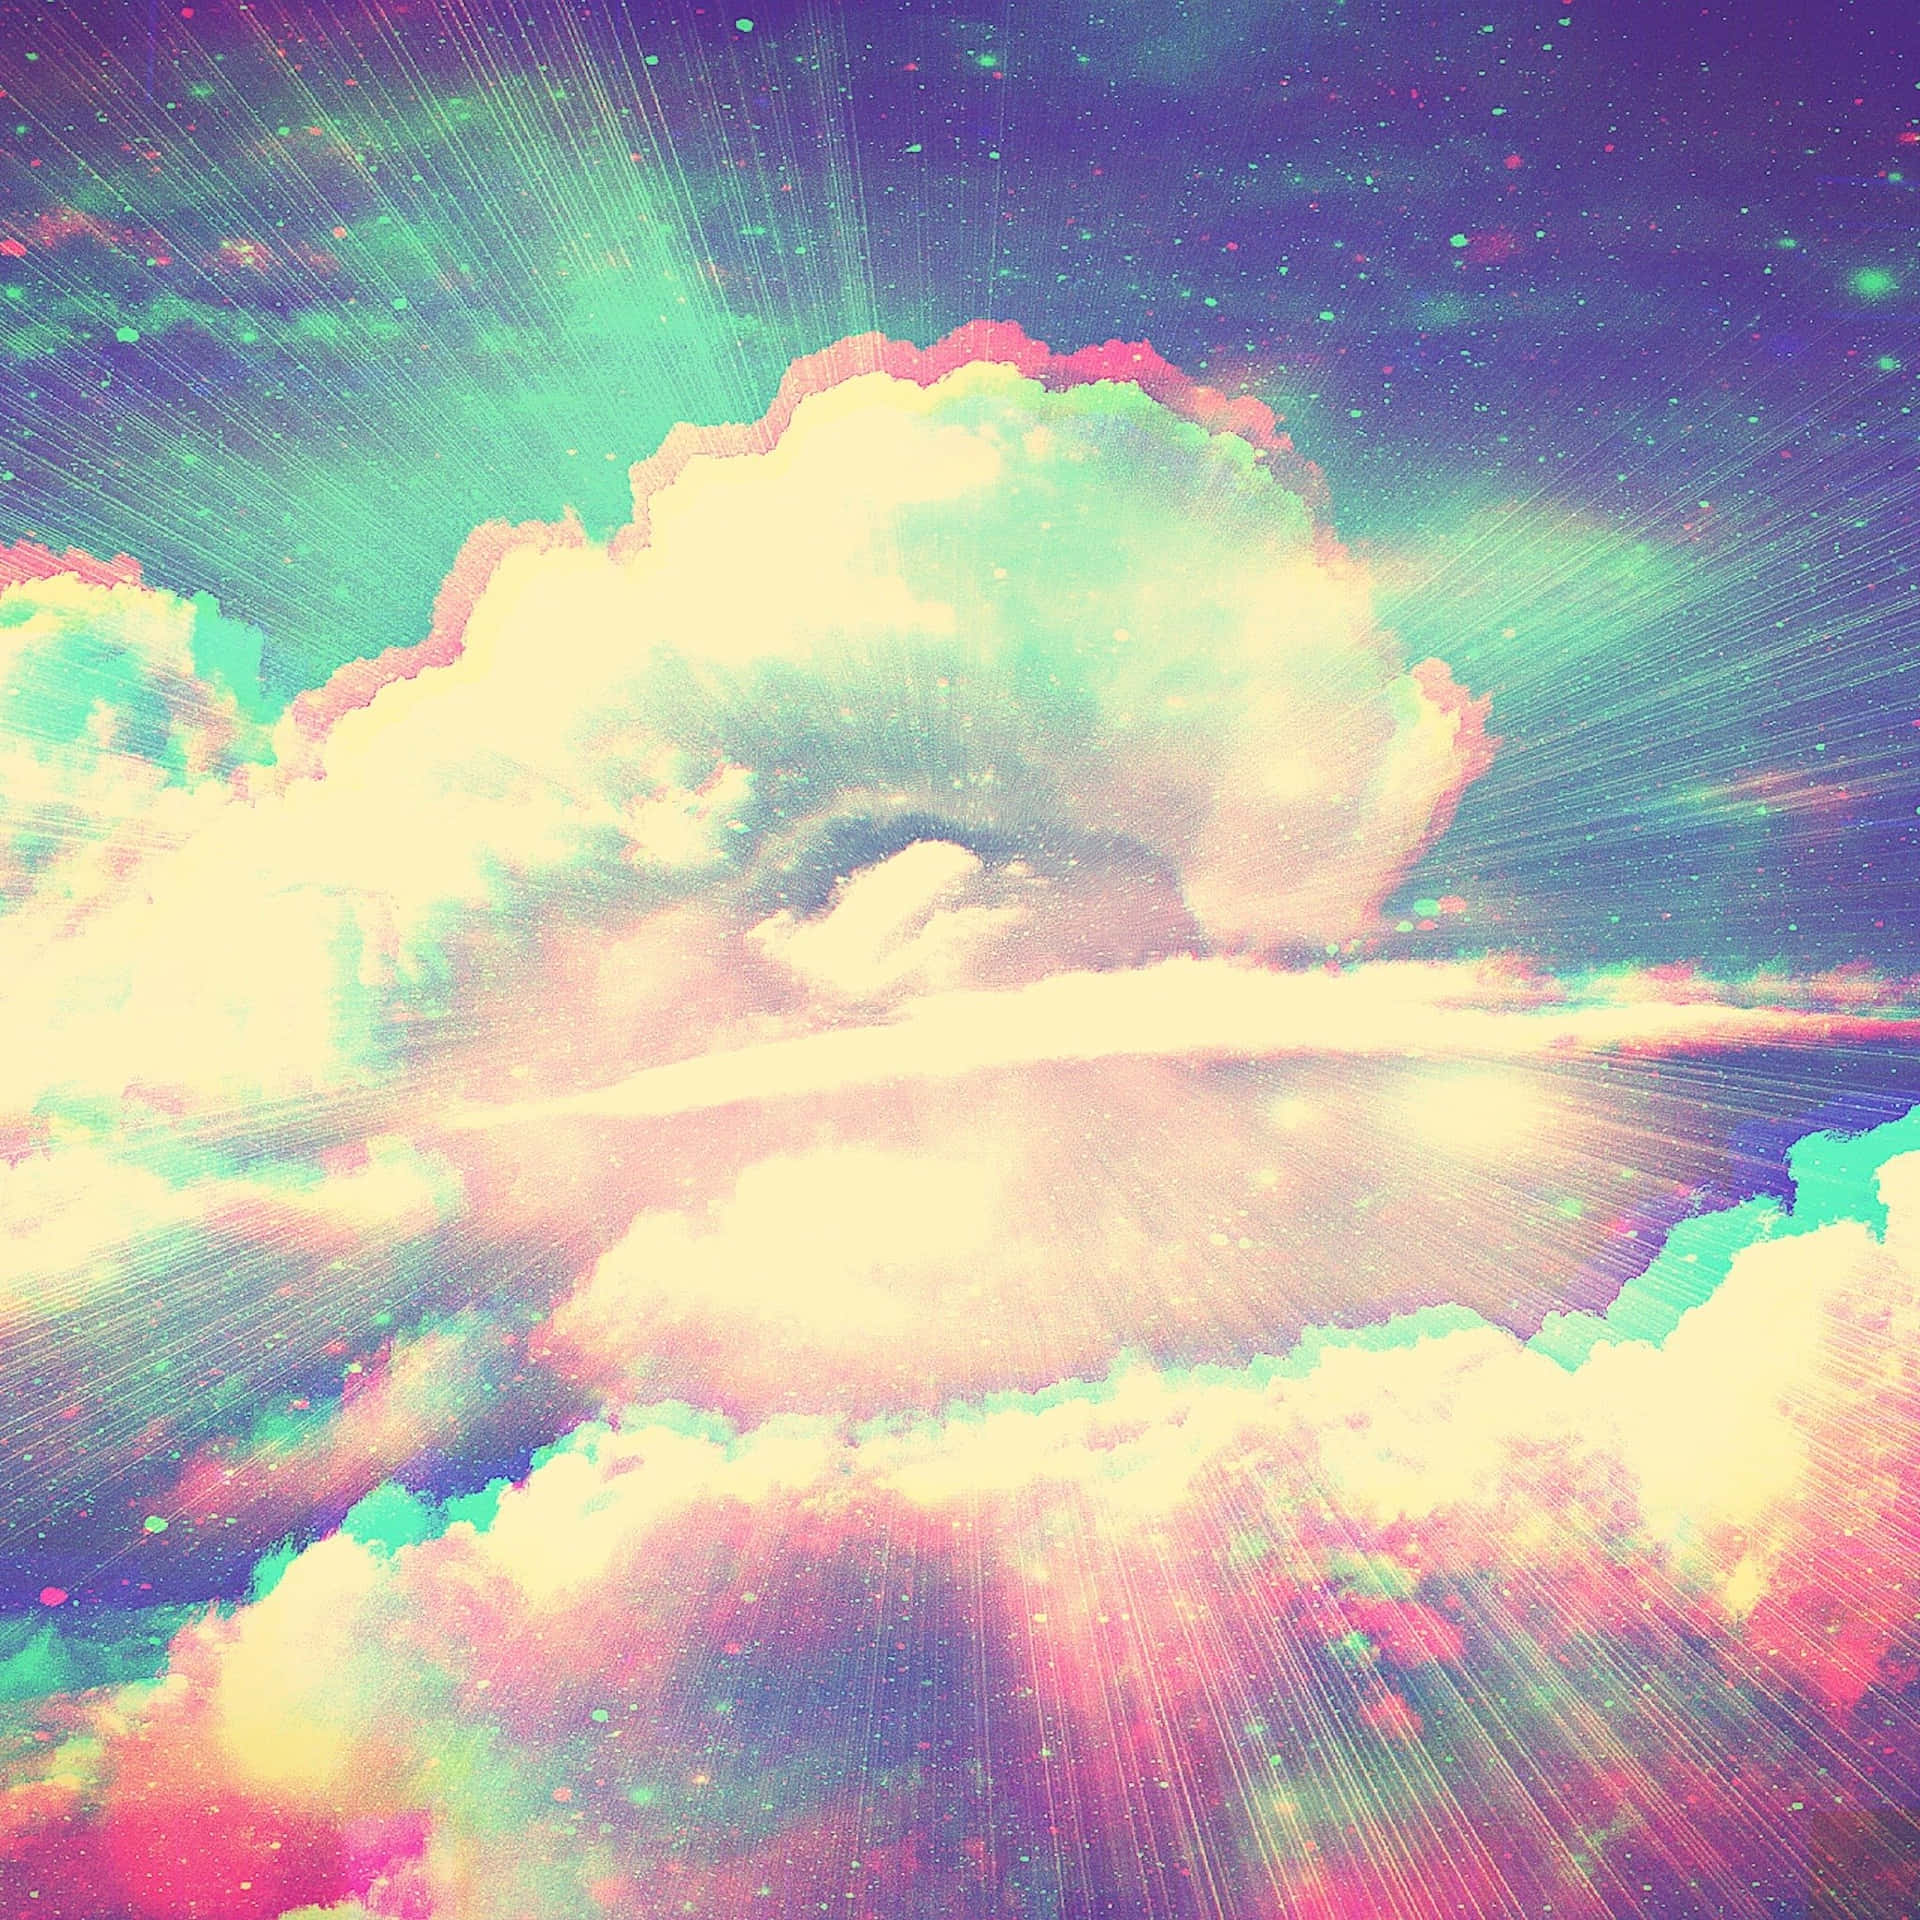 Trippy Aesthetic Cloud With Light Flare Wallpaper